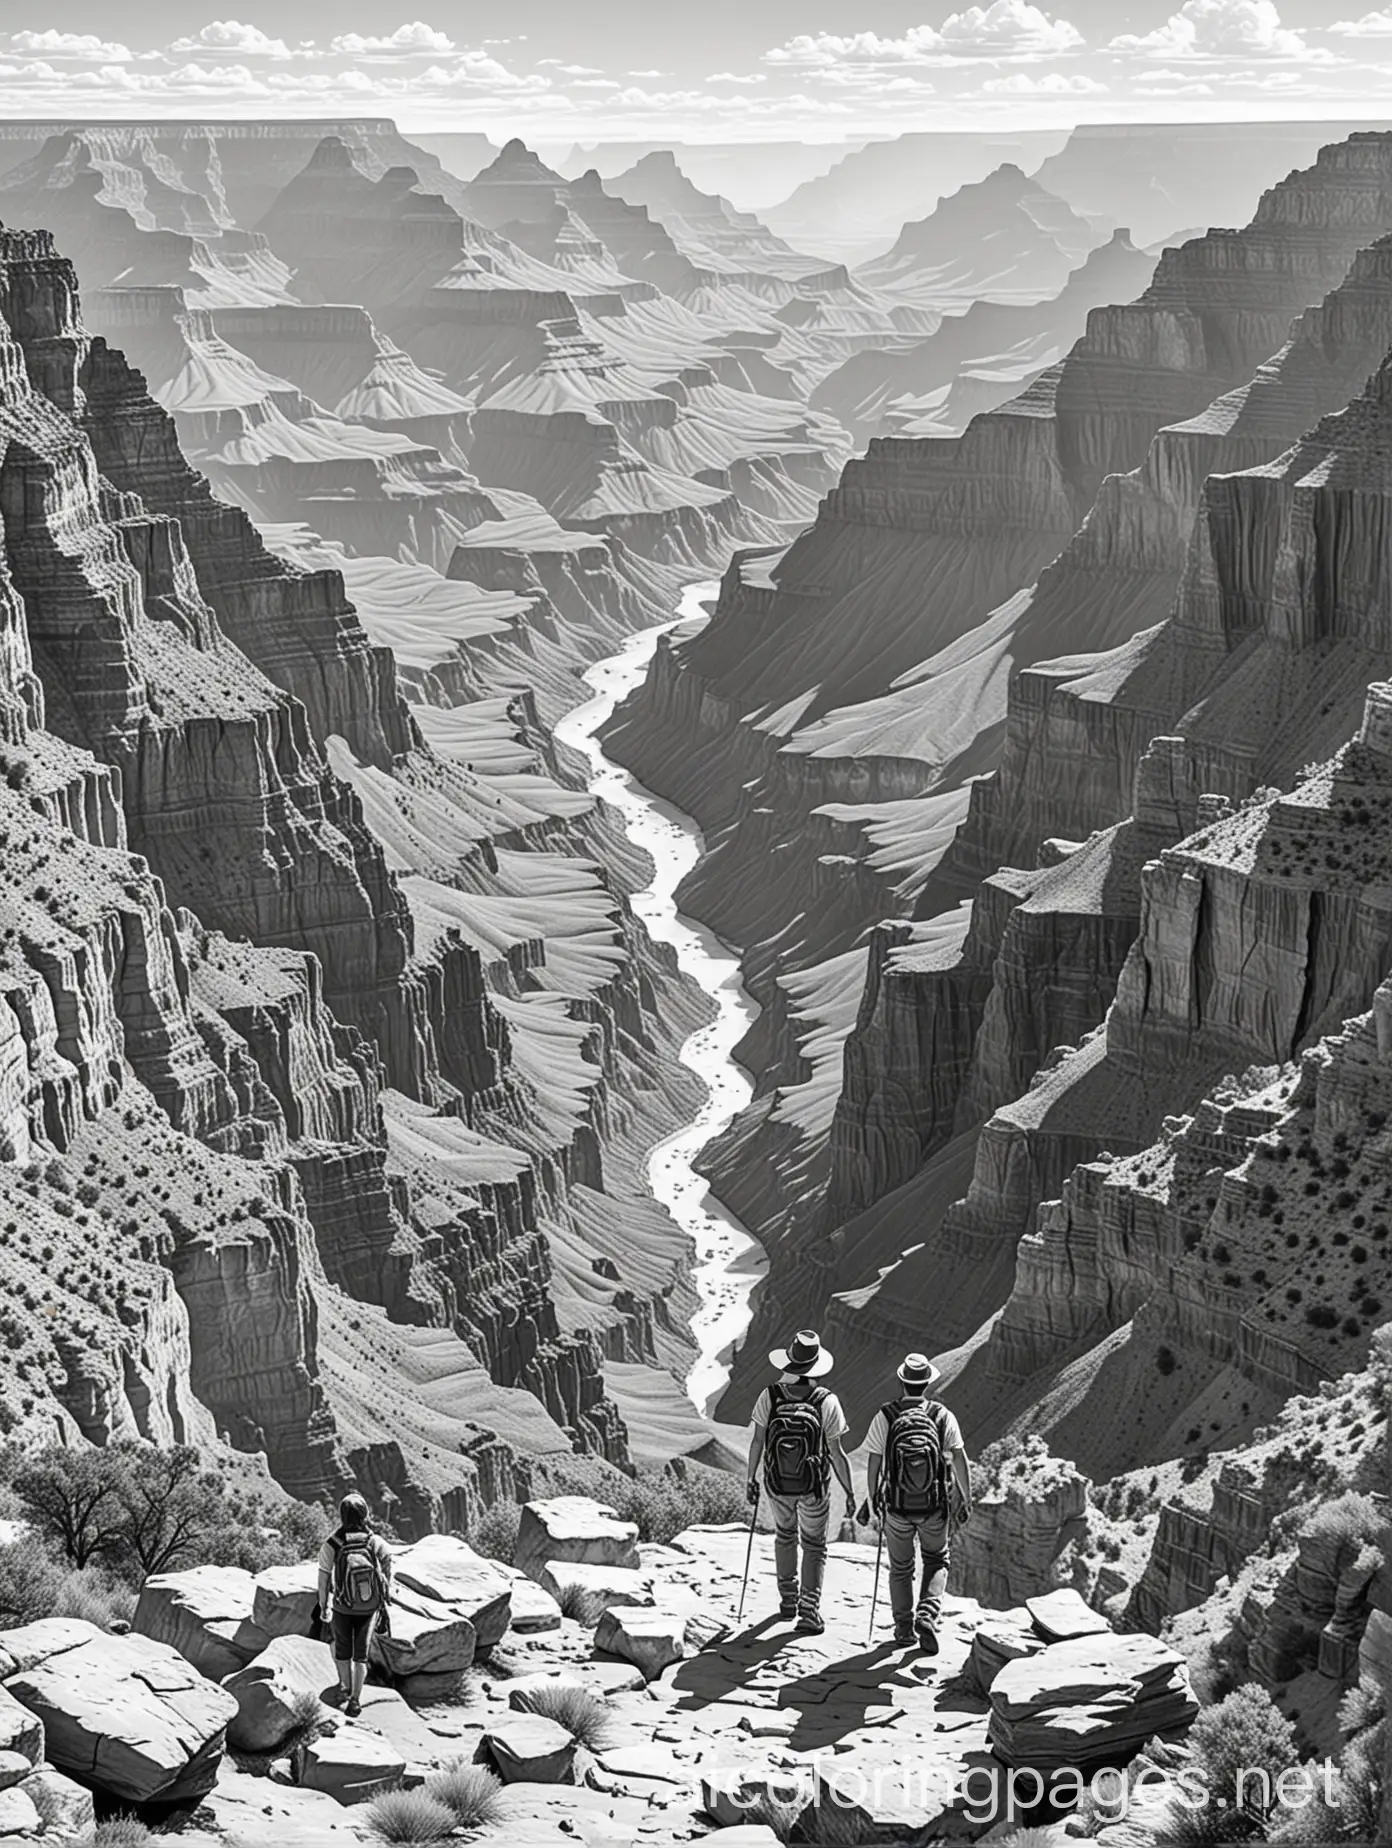 The grand canyon in USA, tourists walking, dark area, Coloring Page, black and white, line art, white background, Simplicity, Ample White Space. The background of the coloring page is plain white to make it easy for young children to color within the lines. The outlines of all the subjects are easy to distinguish, making it simple for kids to color without too much difficulty